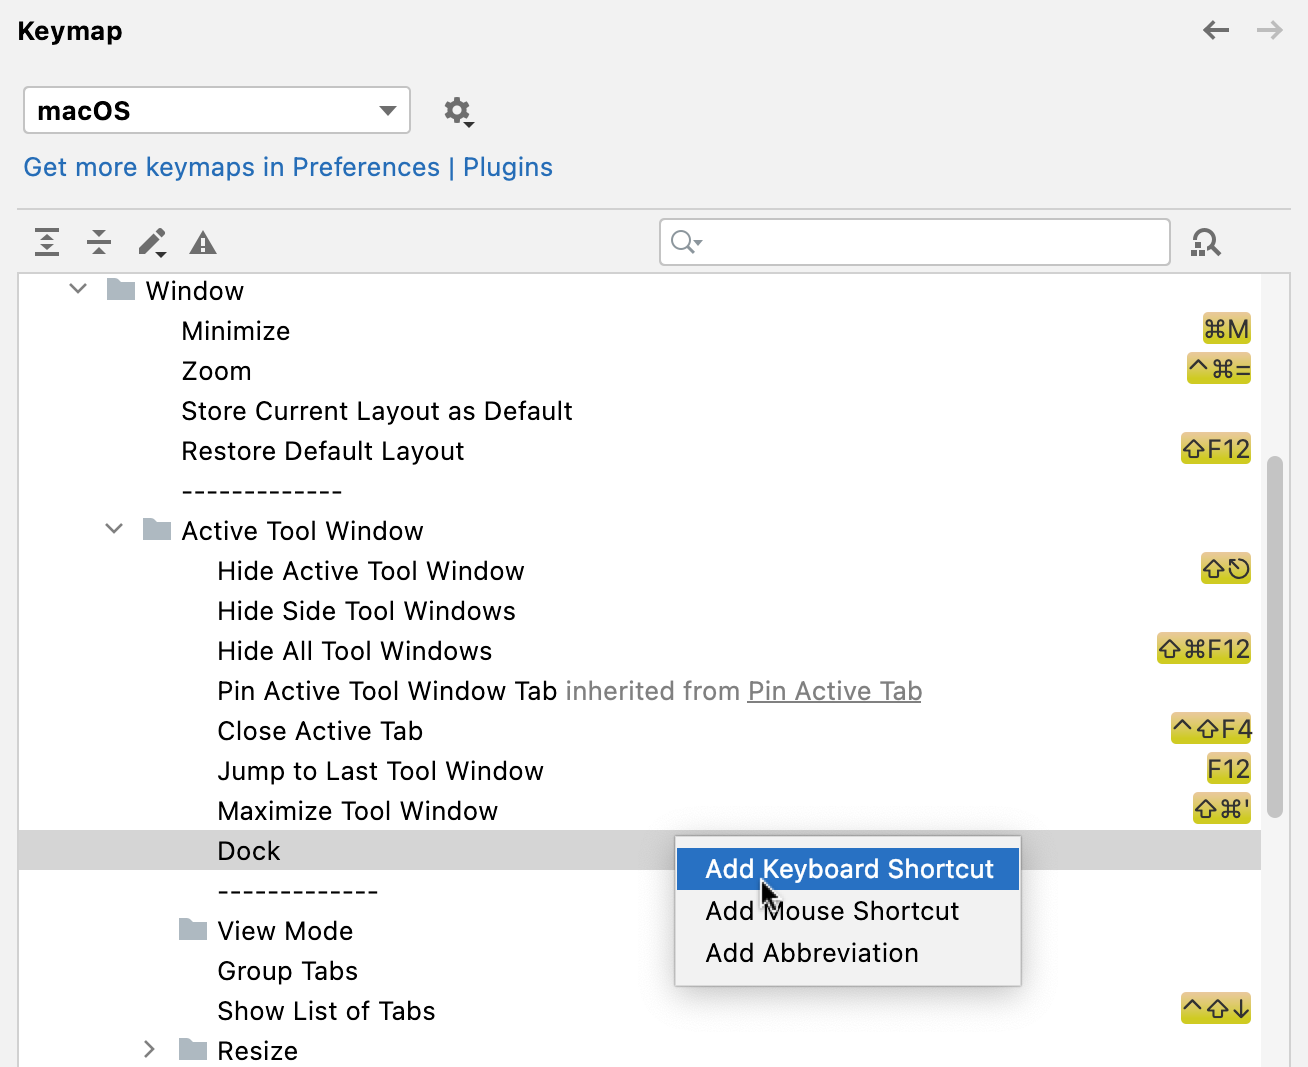 Shortcuts for windows viewing modes